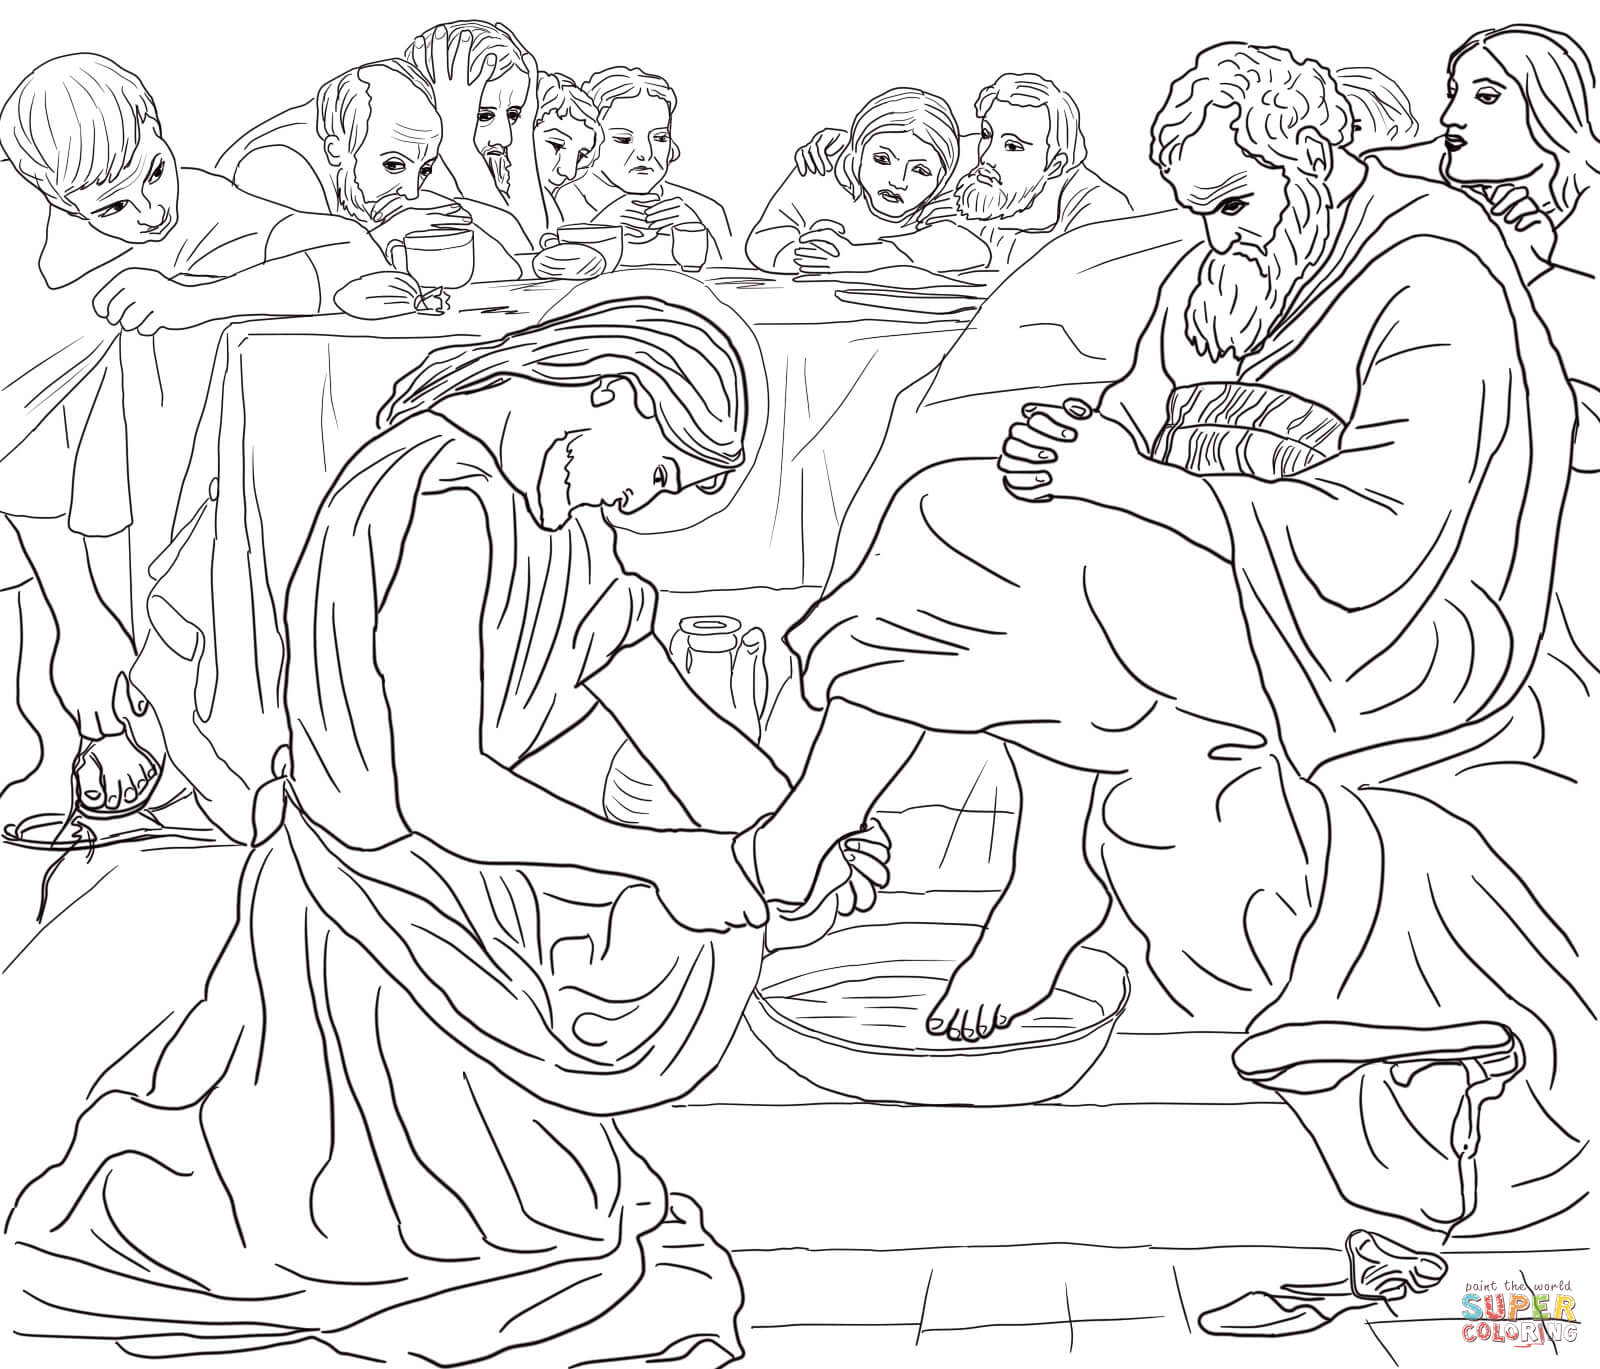 Christ washing peters feet coloring page free printable coloring pages